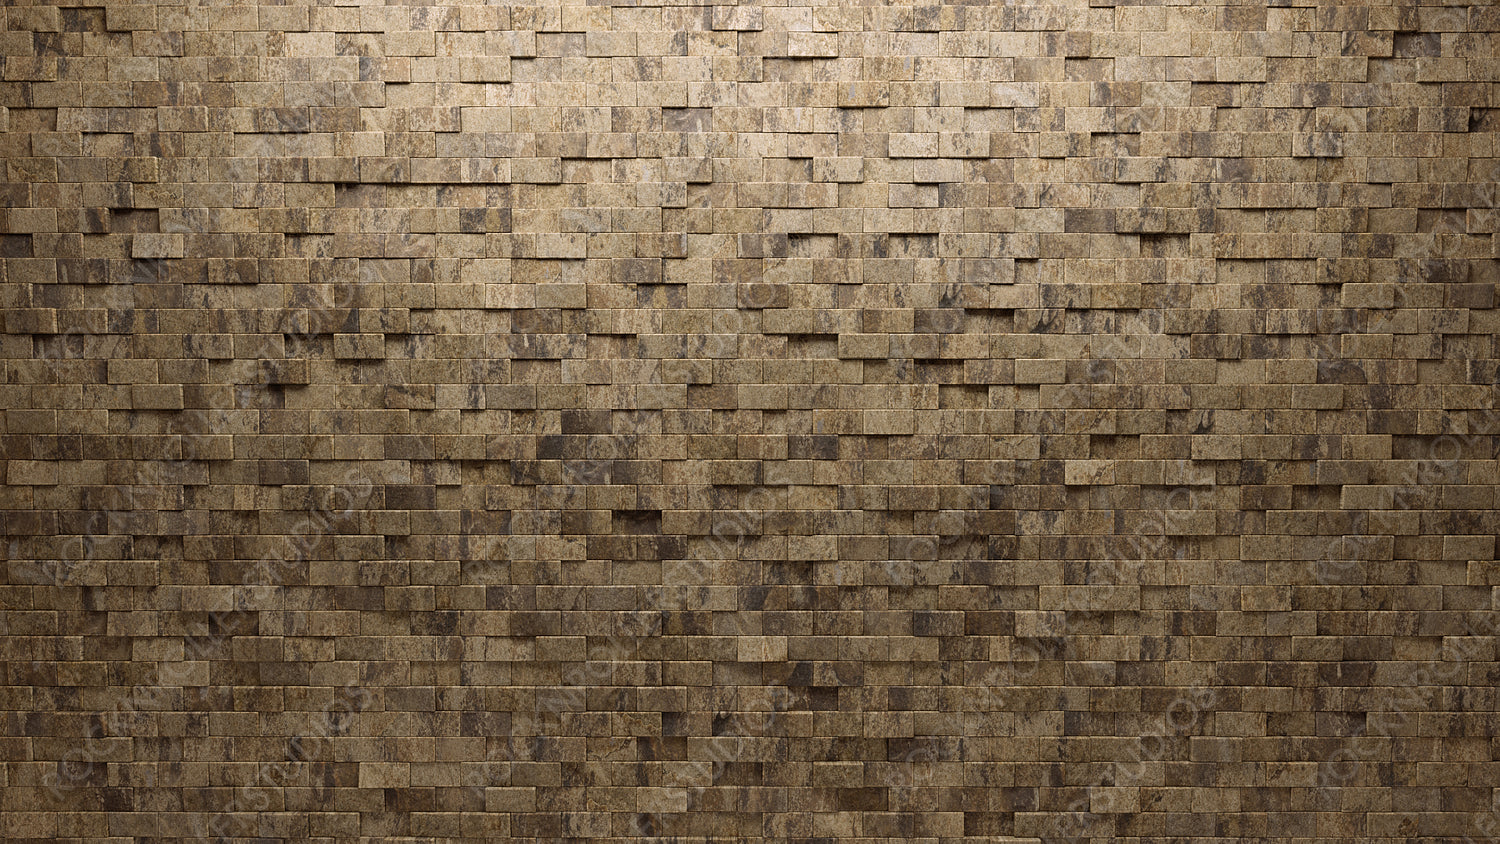 3D, Semigloss Mosaic Tiles arranged in the shape of a wall. Rectangular, Polished, Bricks stacked to create a Natural Stone block background. 3D Render